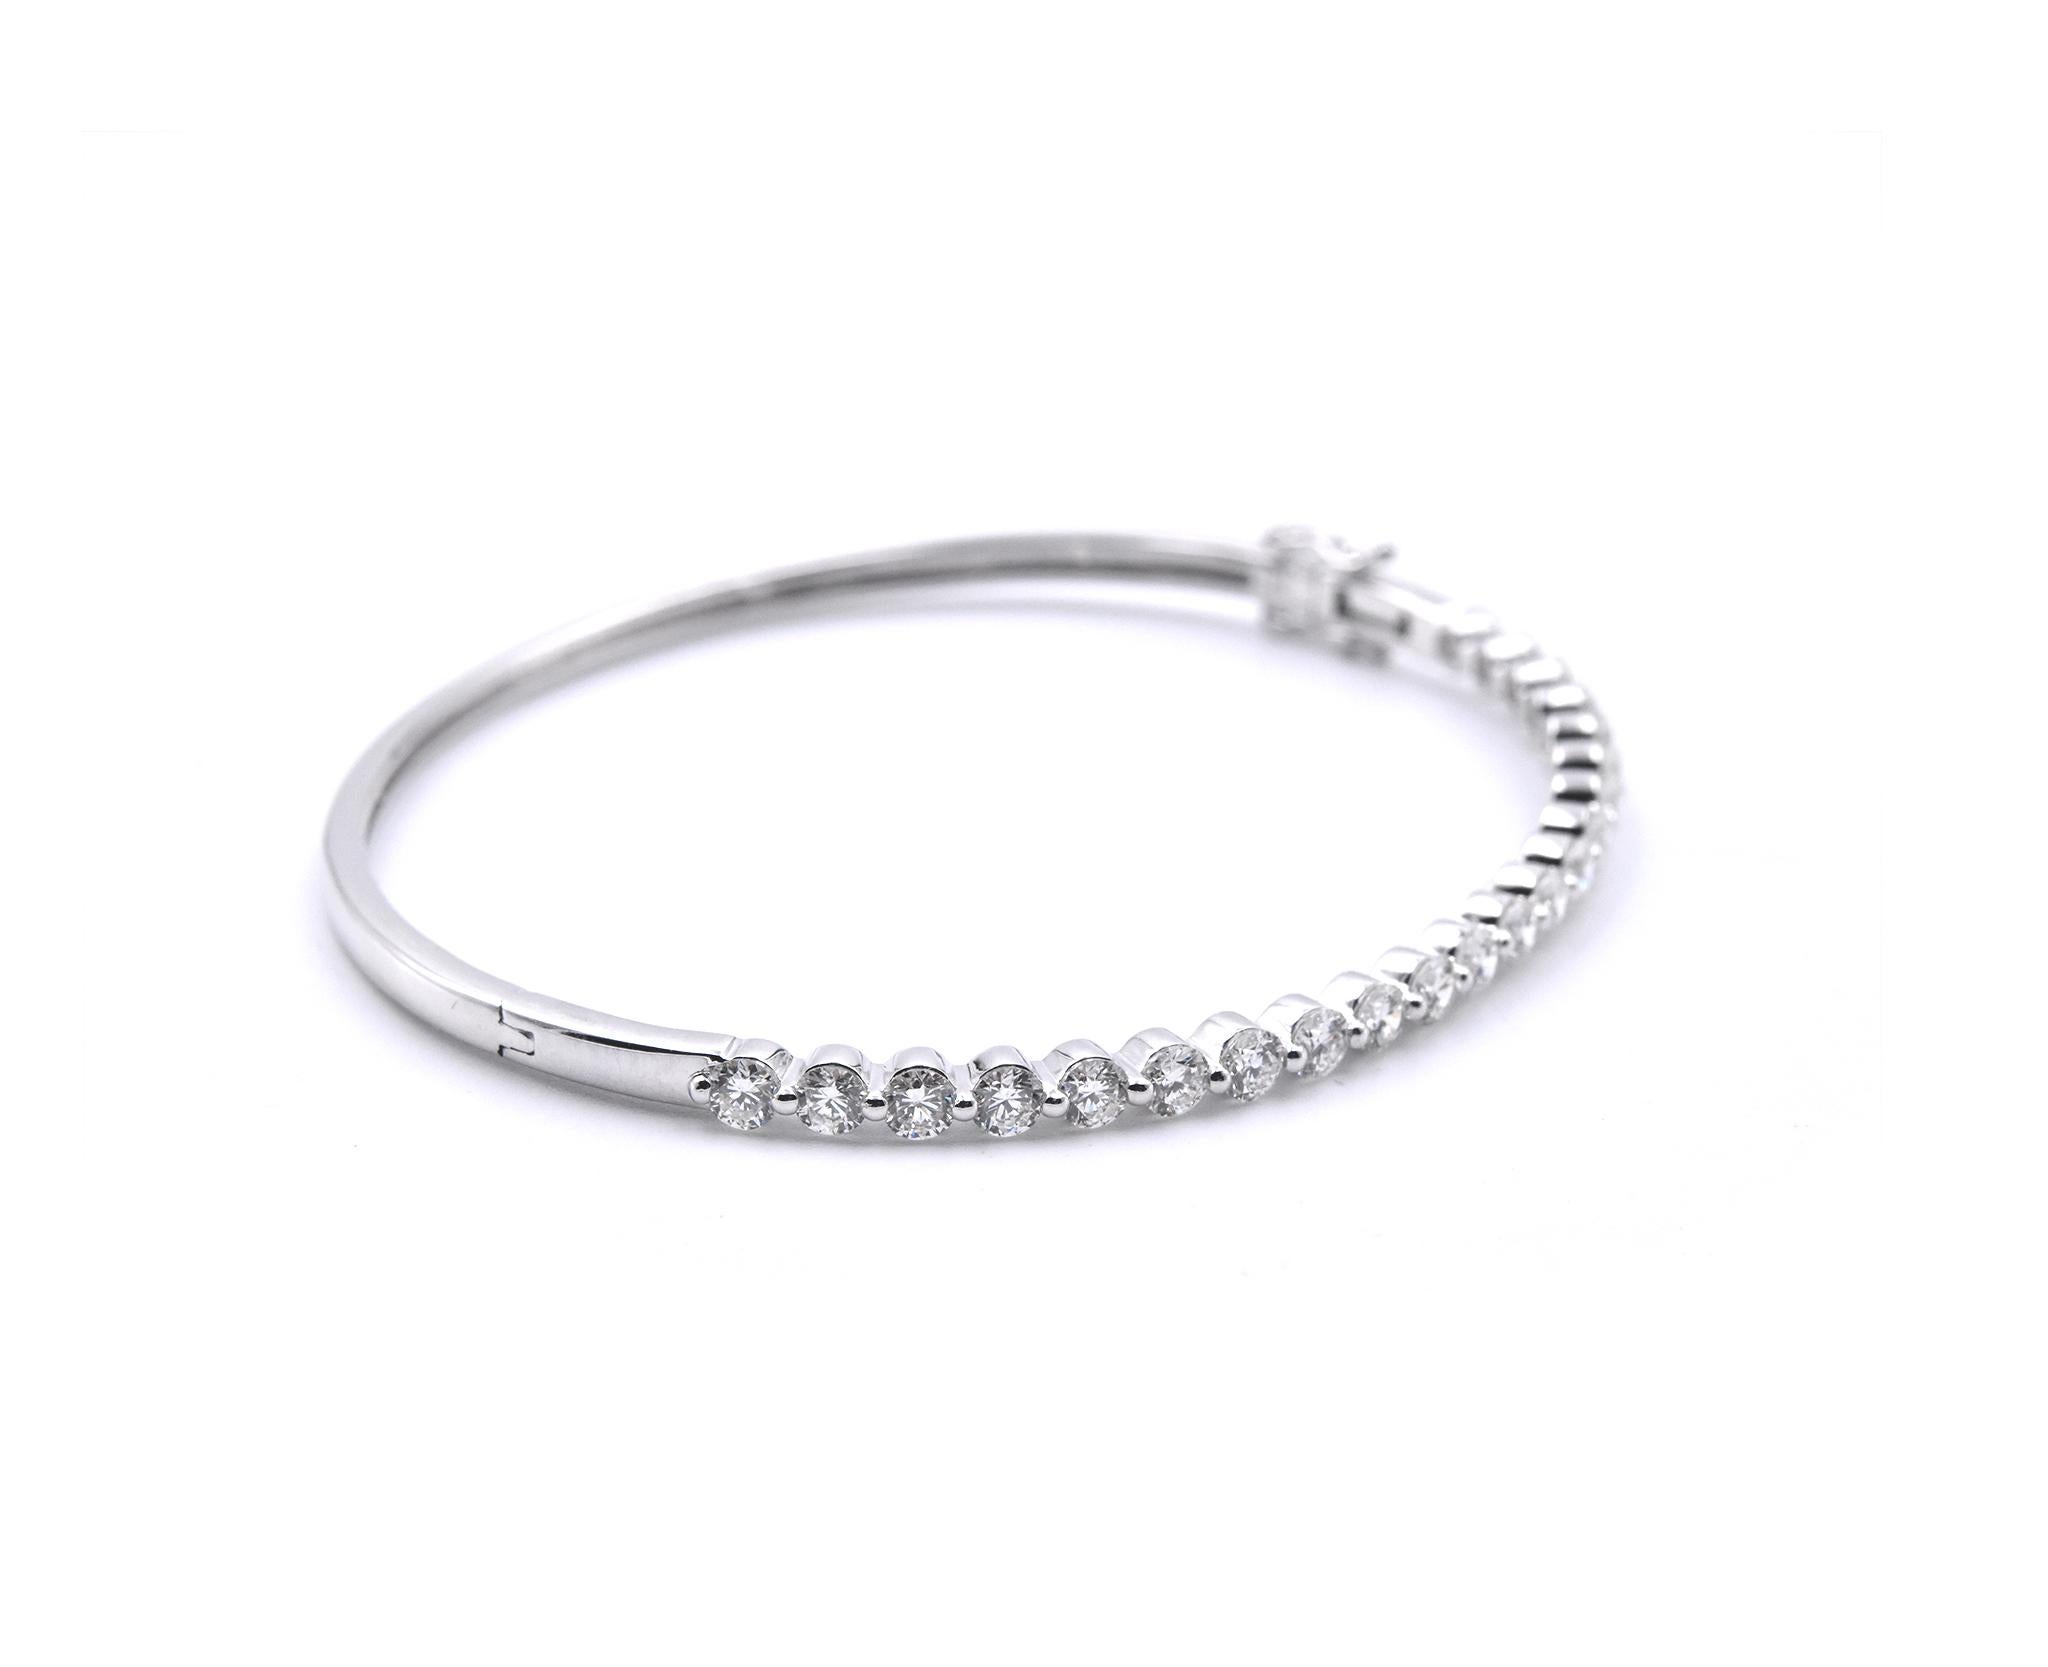 Material: 18K White Gold
Diamonds:  22 Round brilliant cuts = 2.20cttw
Color: G
Clarity: VS
Dimensions: bracelet measures 6.5-inches in length
Weight: 5.90grams
